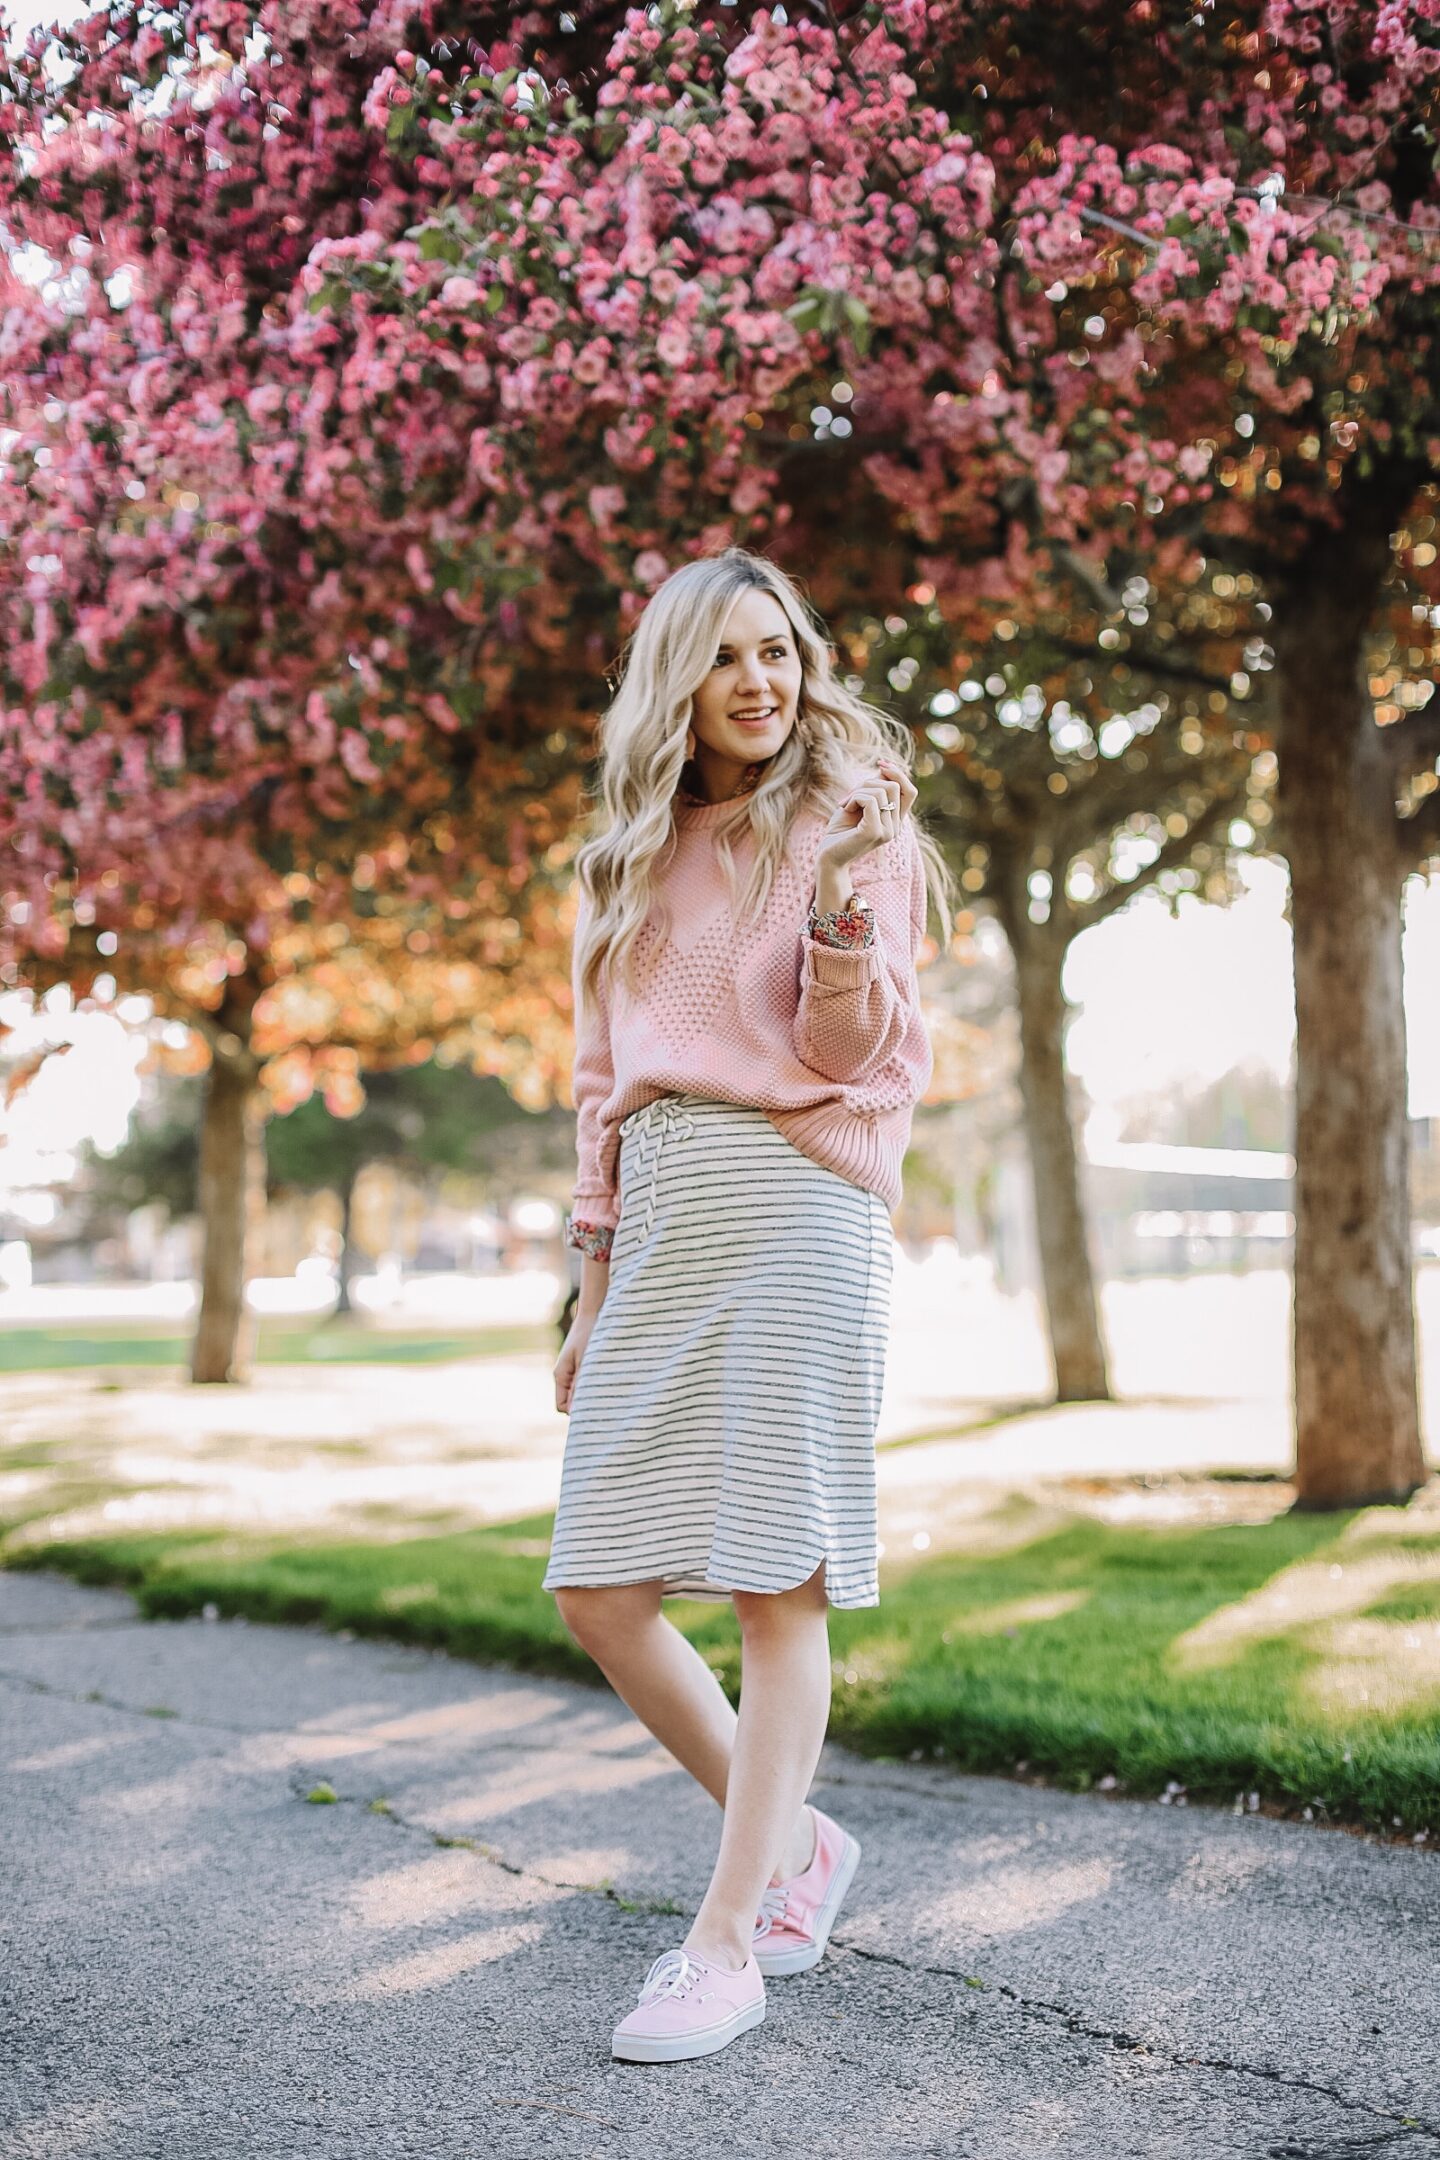 styling a striped skirt for spring